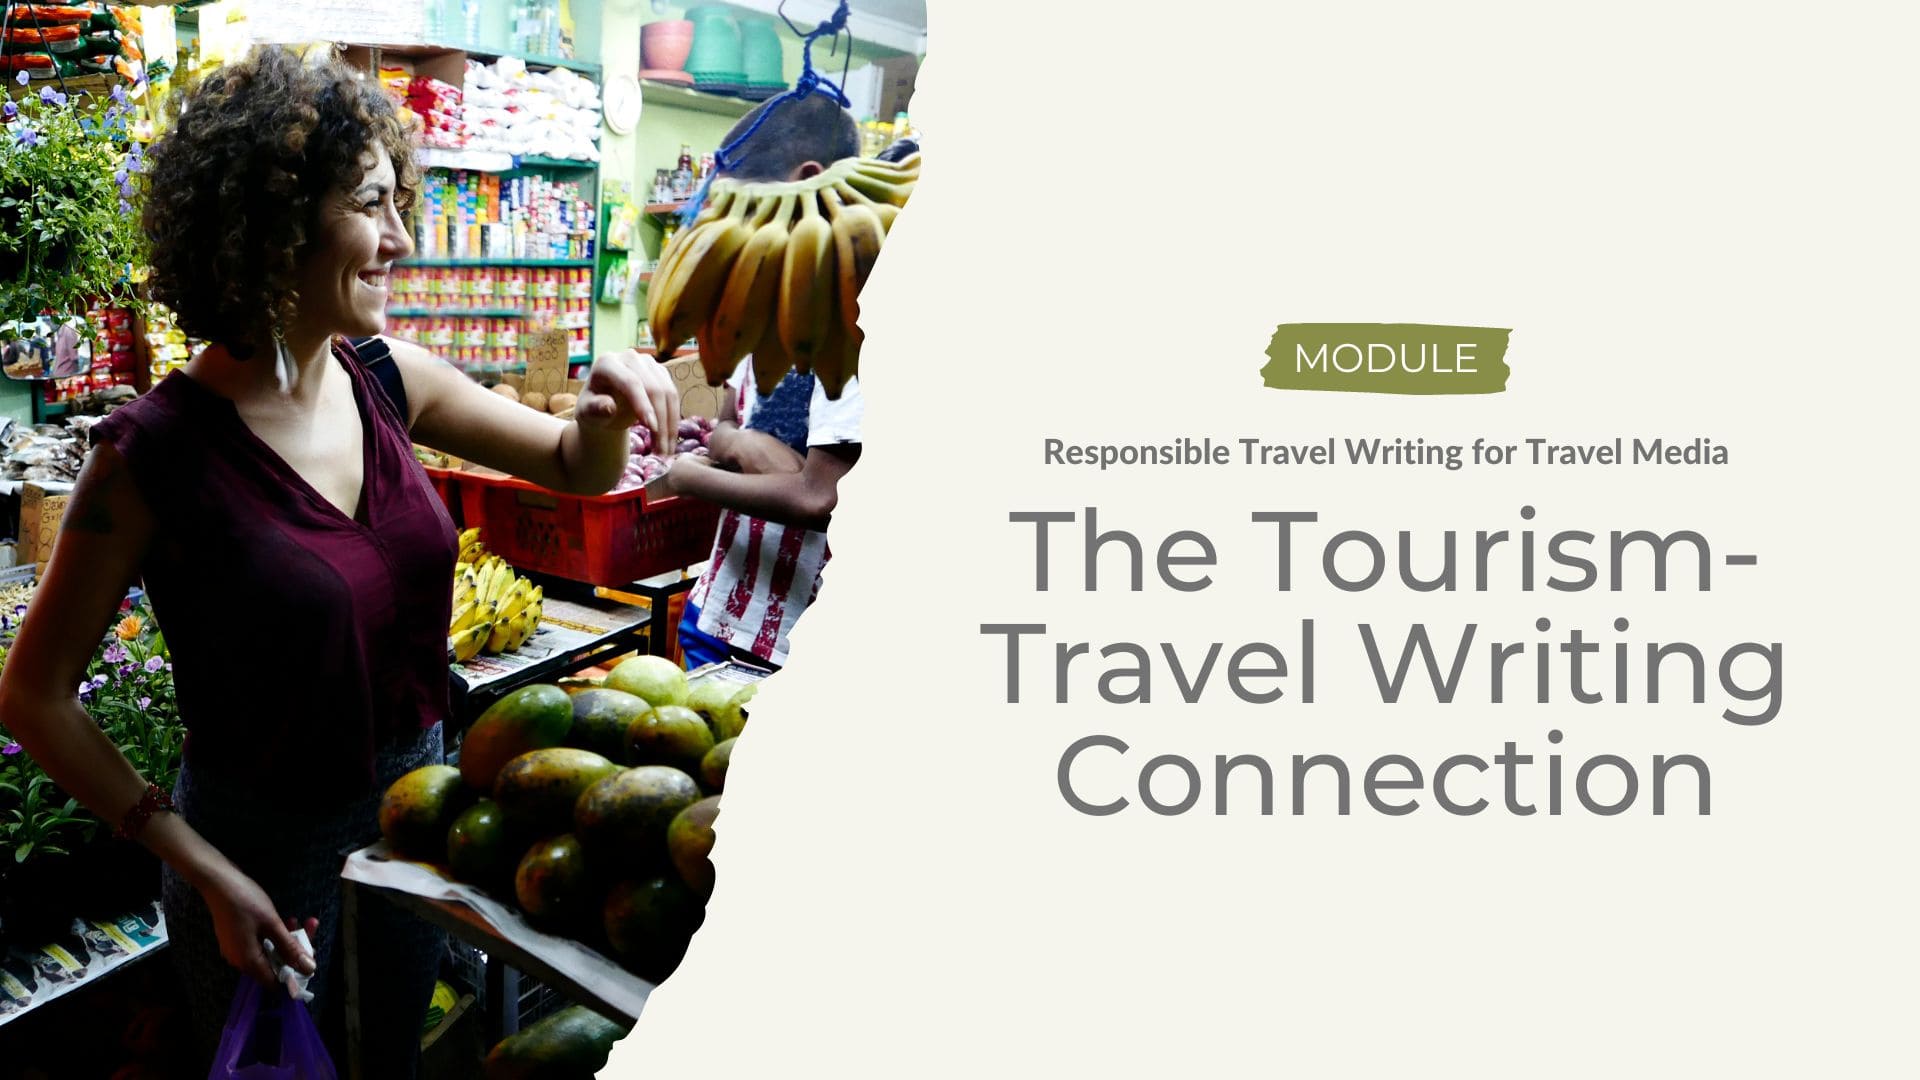 The Tourism-Travel Writing Connection